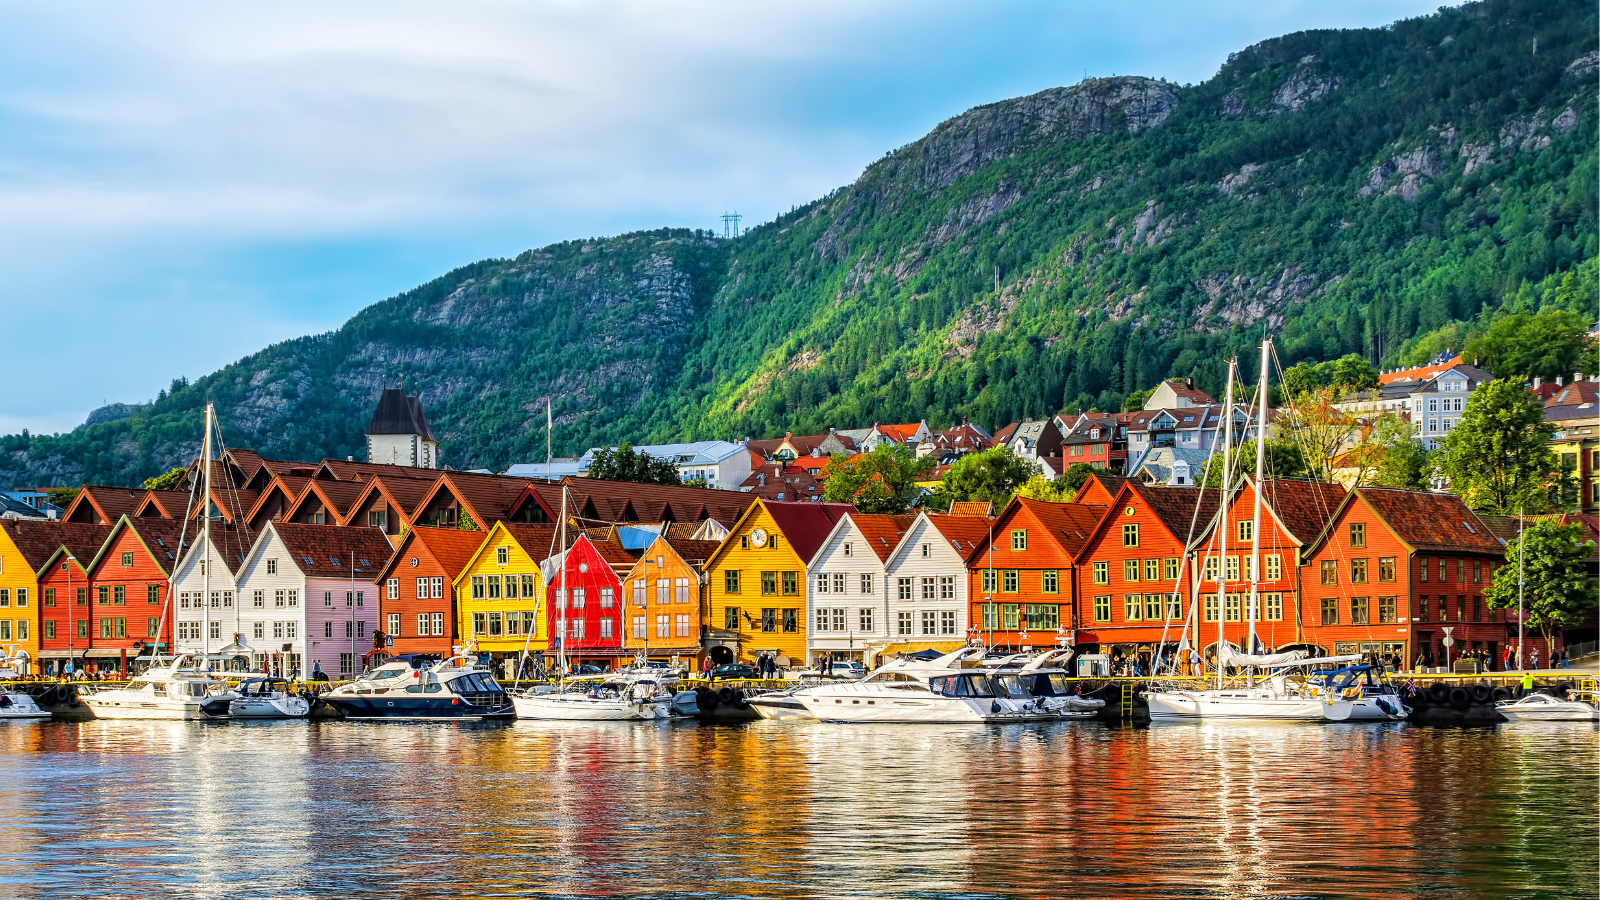 Norway - destination for the journey to do 10 best things to do in Norway